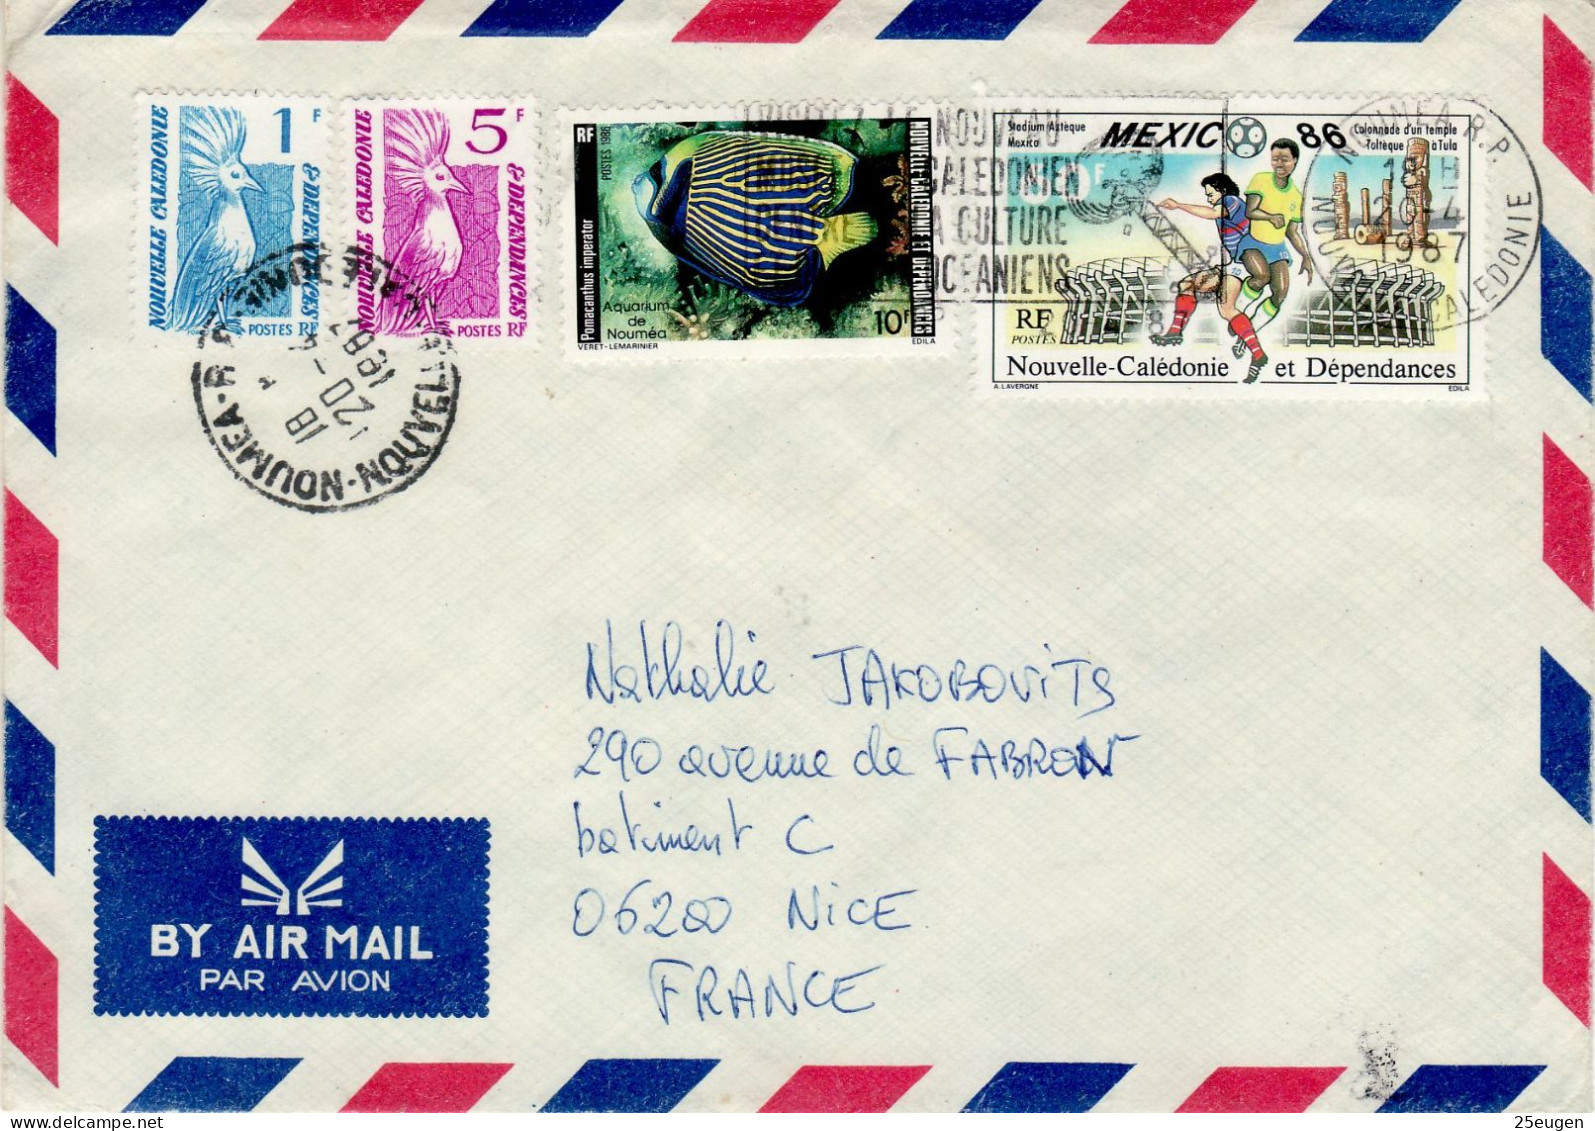 NEW CALEDONIA 1987 AIRMAIL LETTER SENT FROM NOUMEA TO NICE - Briefe U. Dokumente